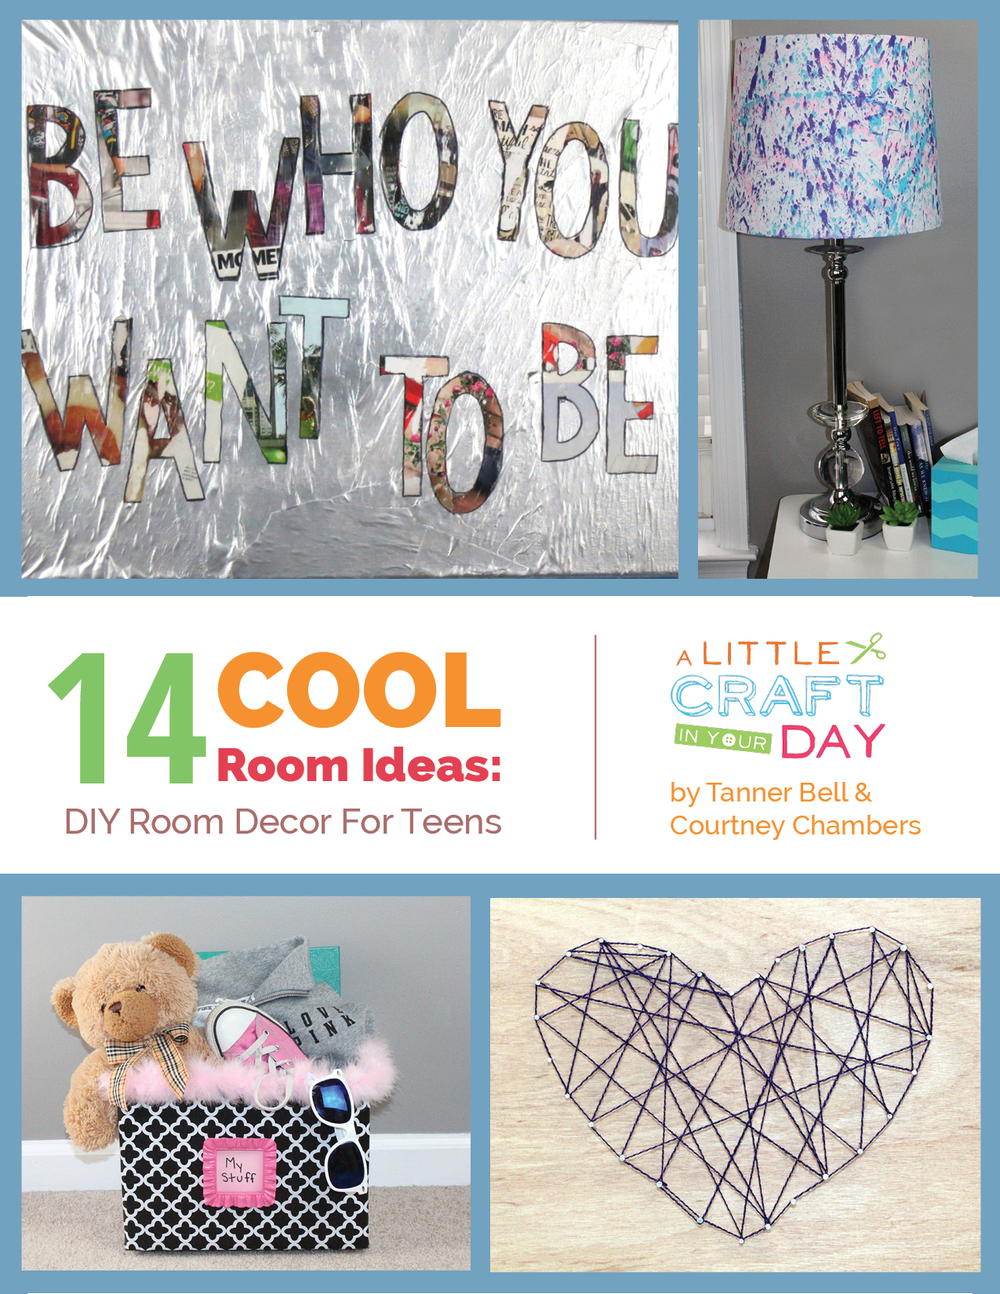 Art Ideas Cute Diy Room Decor Ideas For Teens Diy Bedroom Projects For Teenagers Heart Our Art World